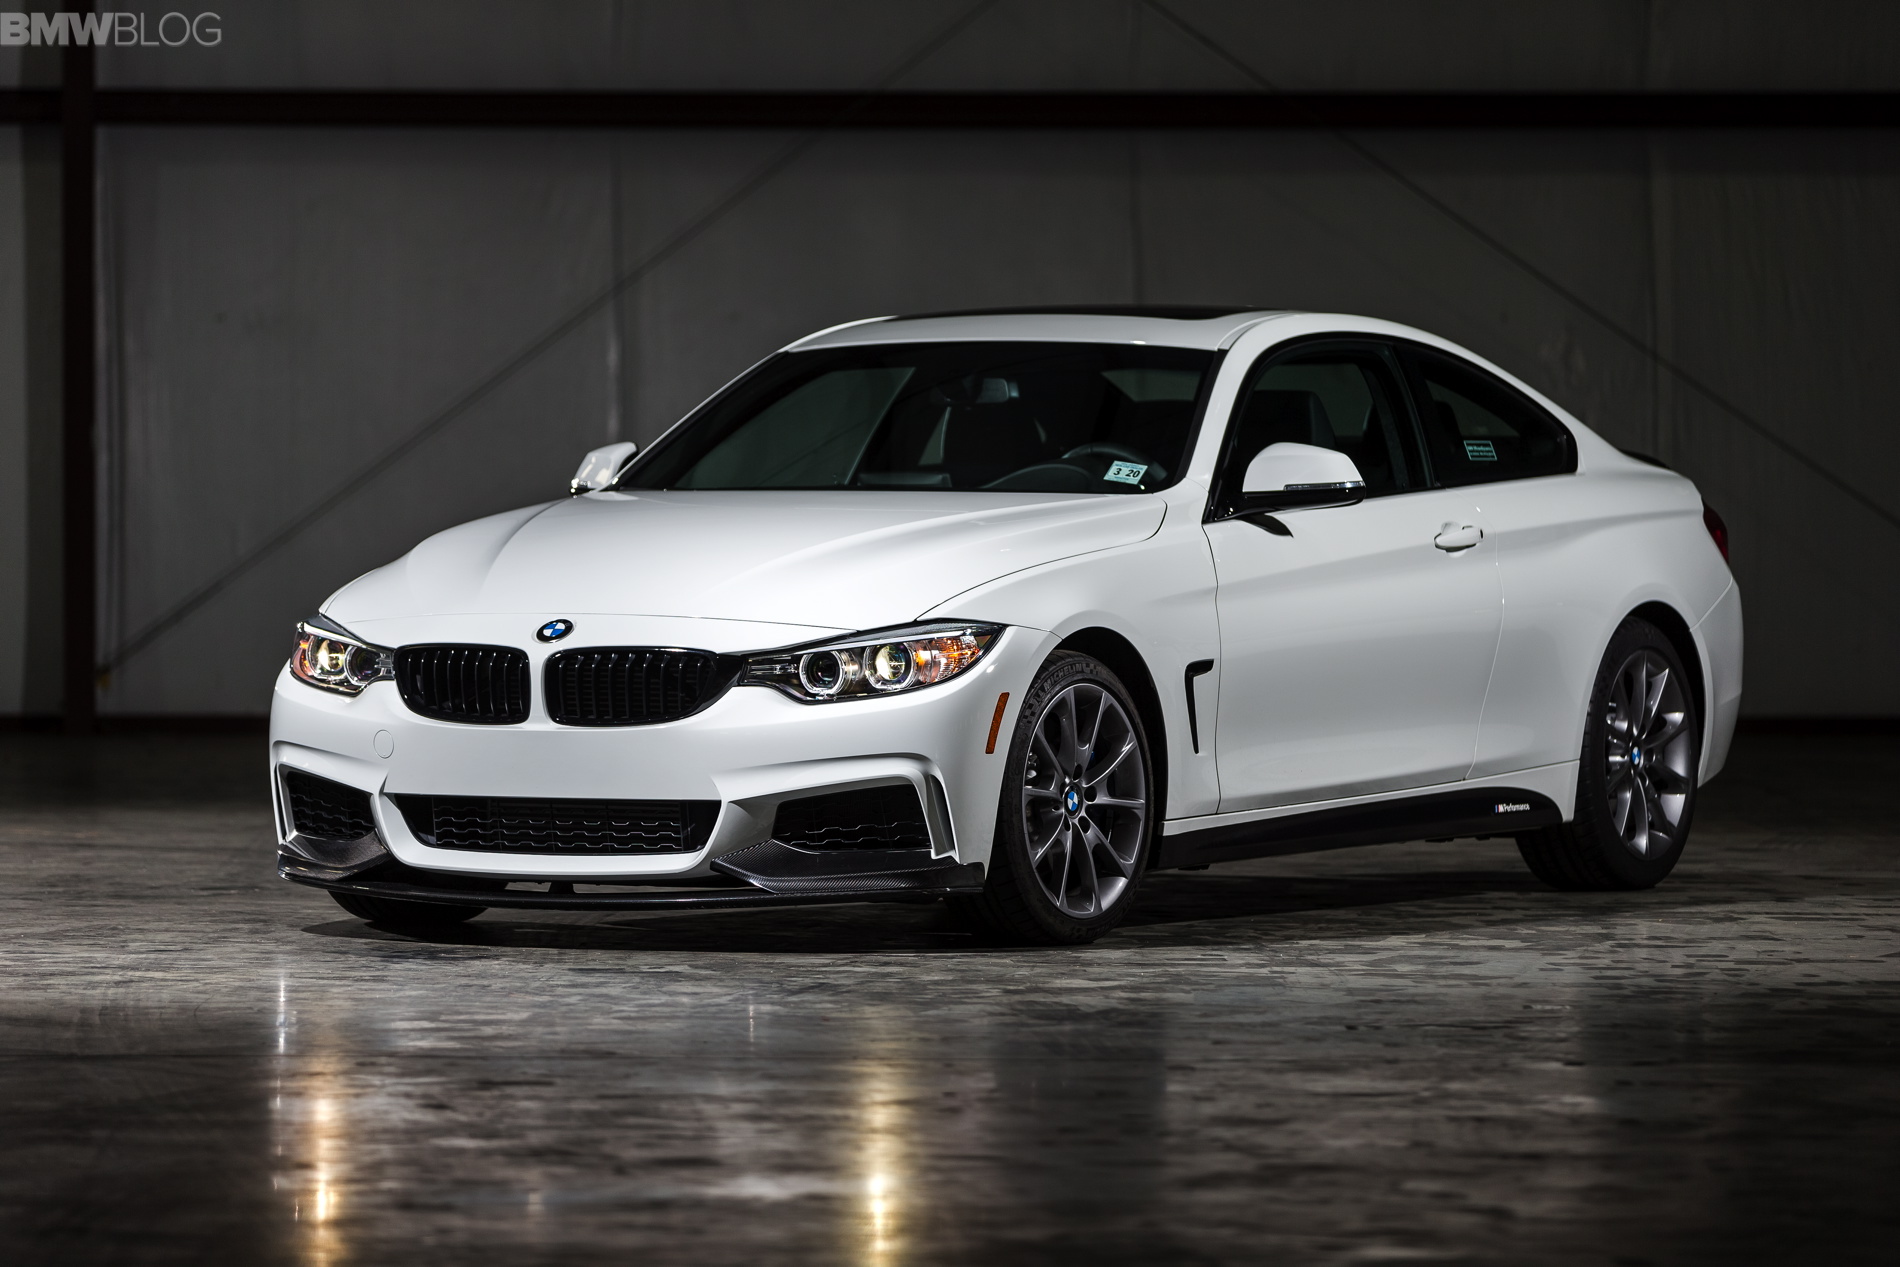 BMW 435i ZHP Coupe images 01